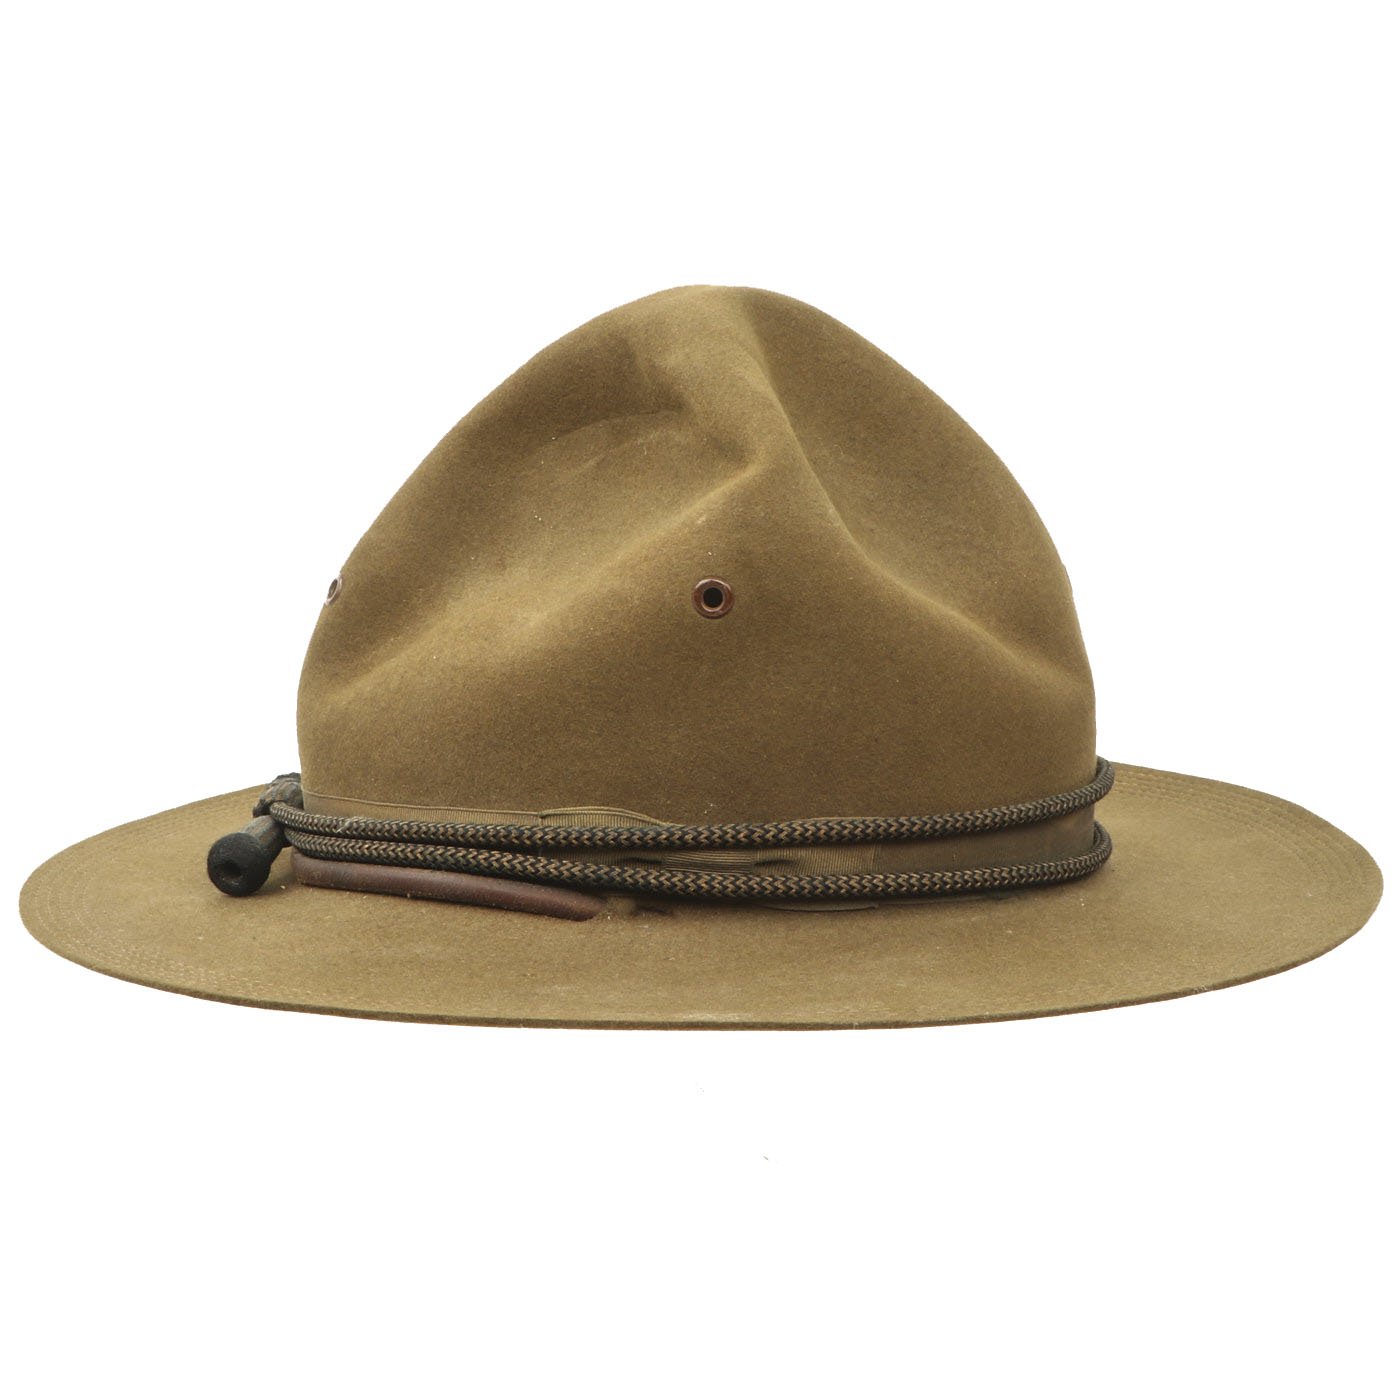 Original WWI U.S. Army M1911 Campaign Hat by Stetson with Officer Hat ...